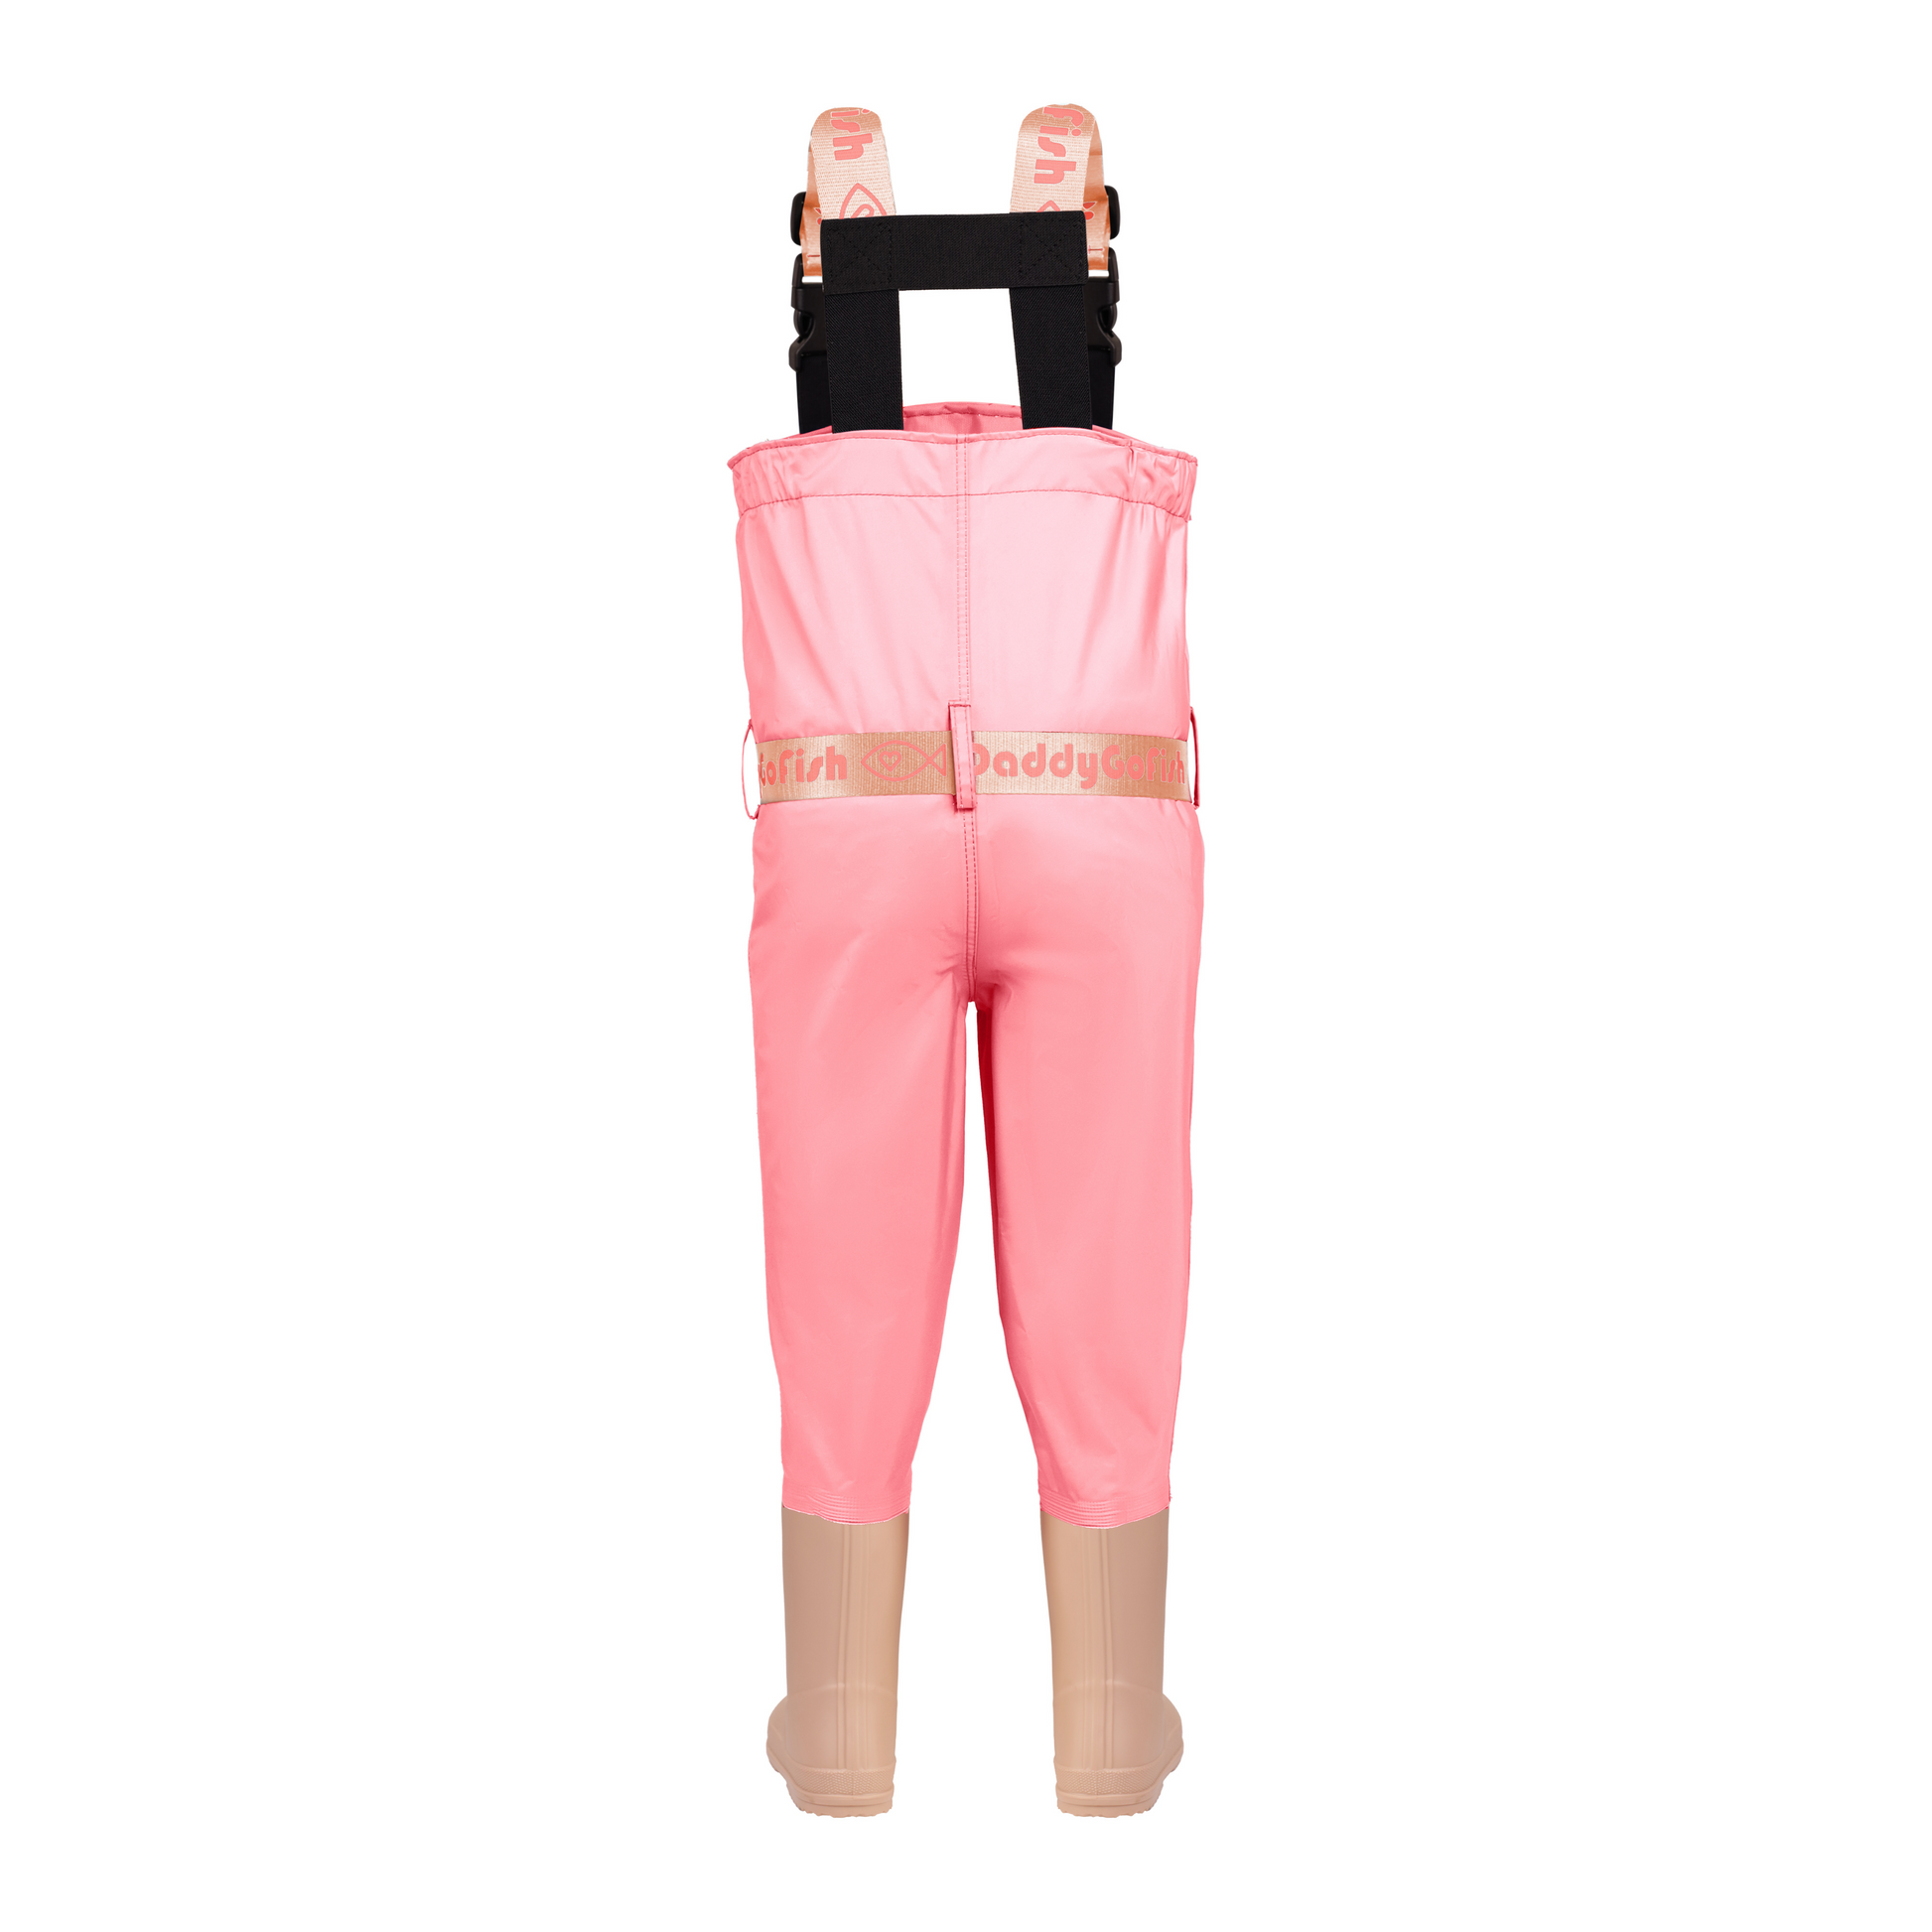 PVC Chest Waders for Kids, Pink Fishing and Hunting Waders